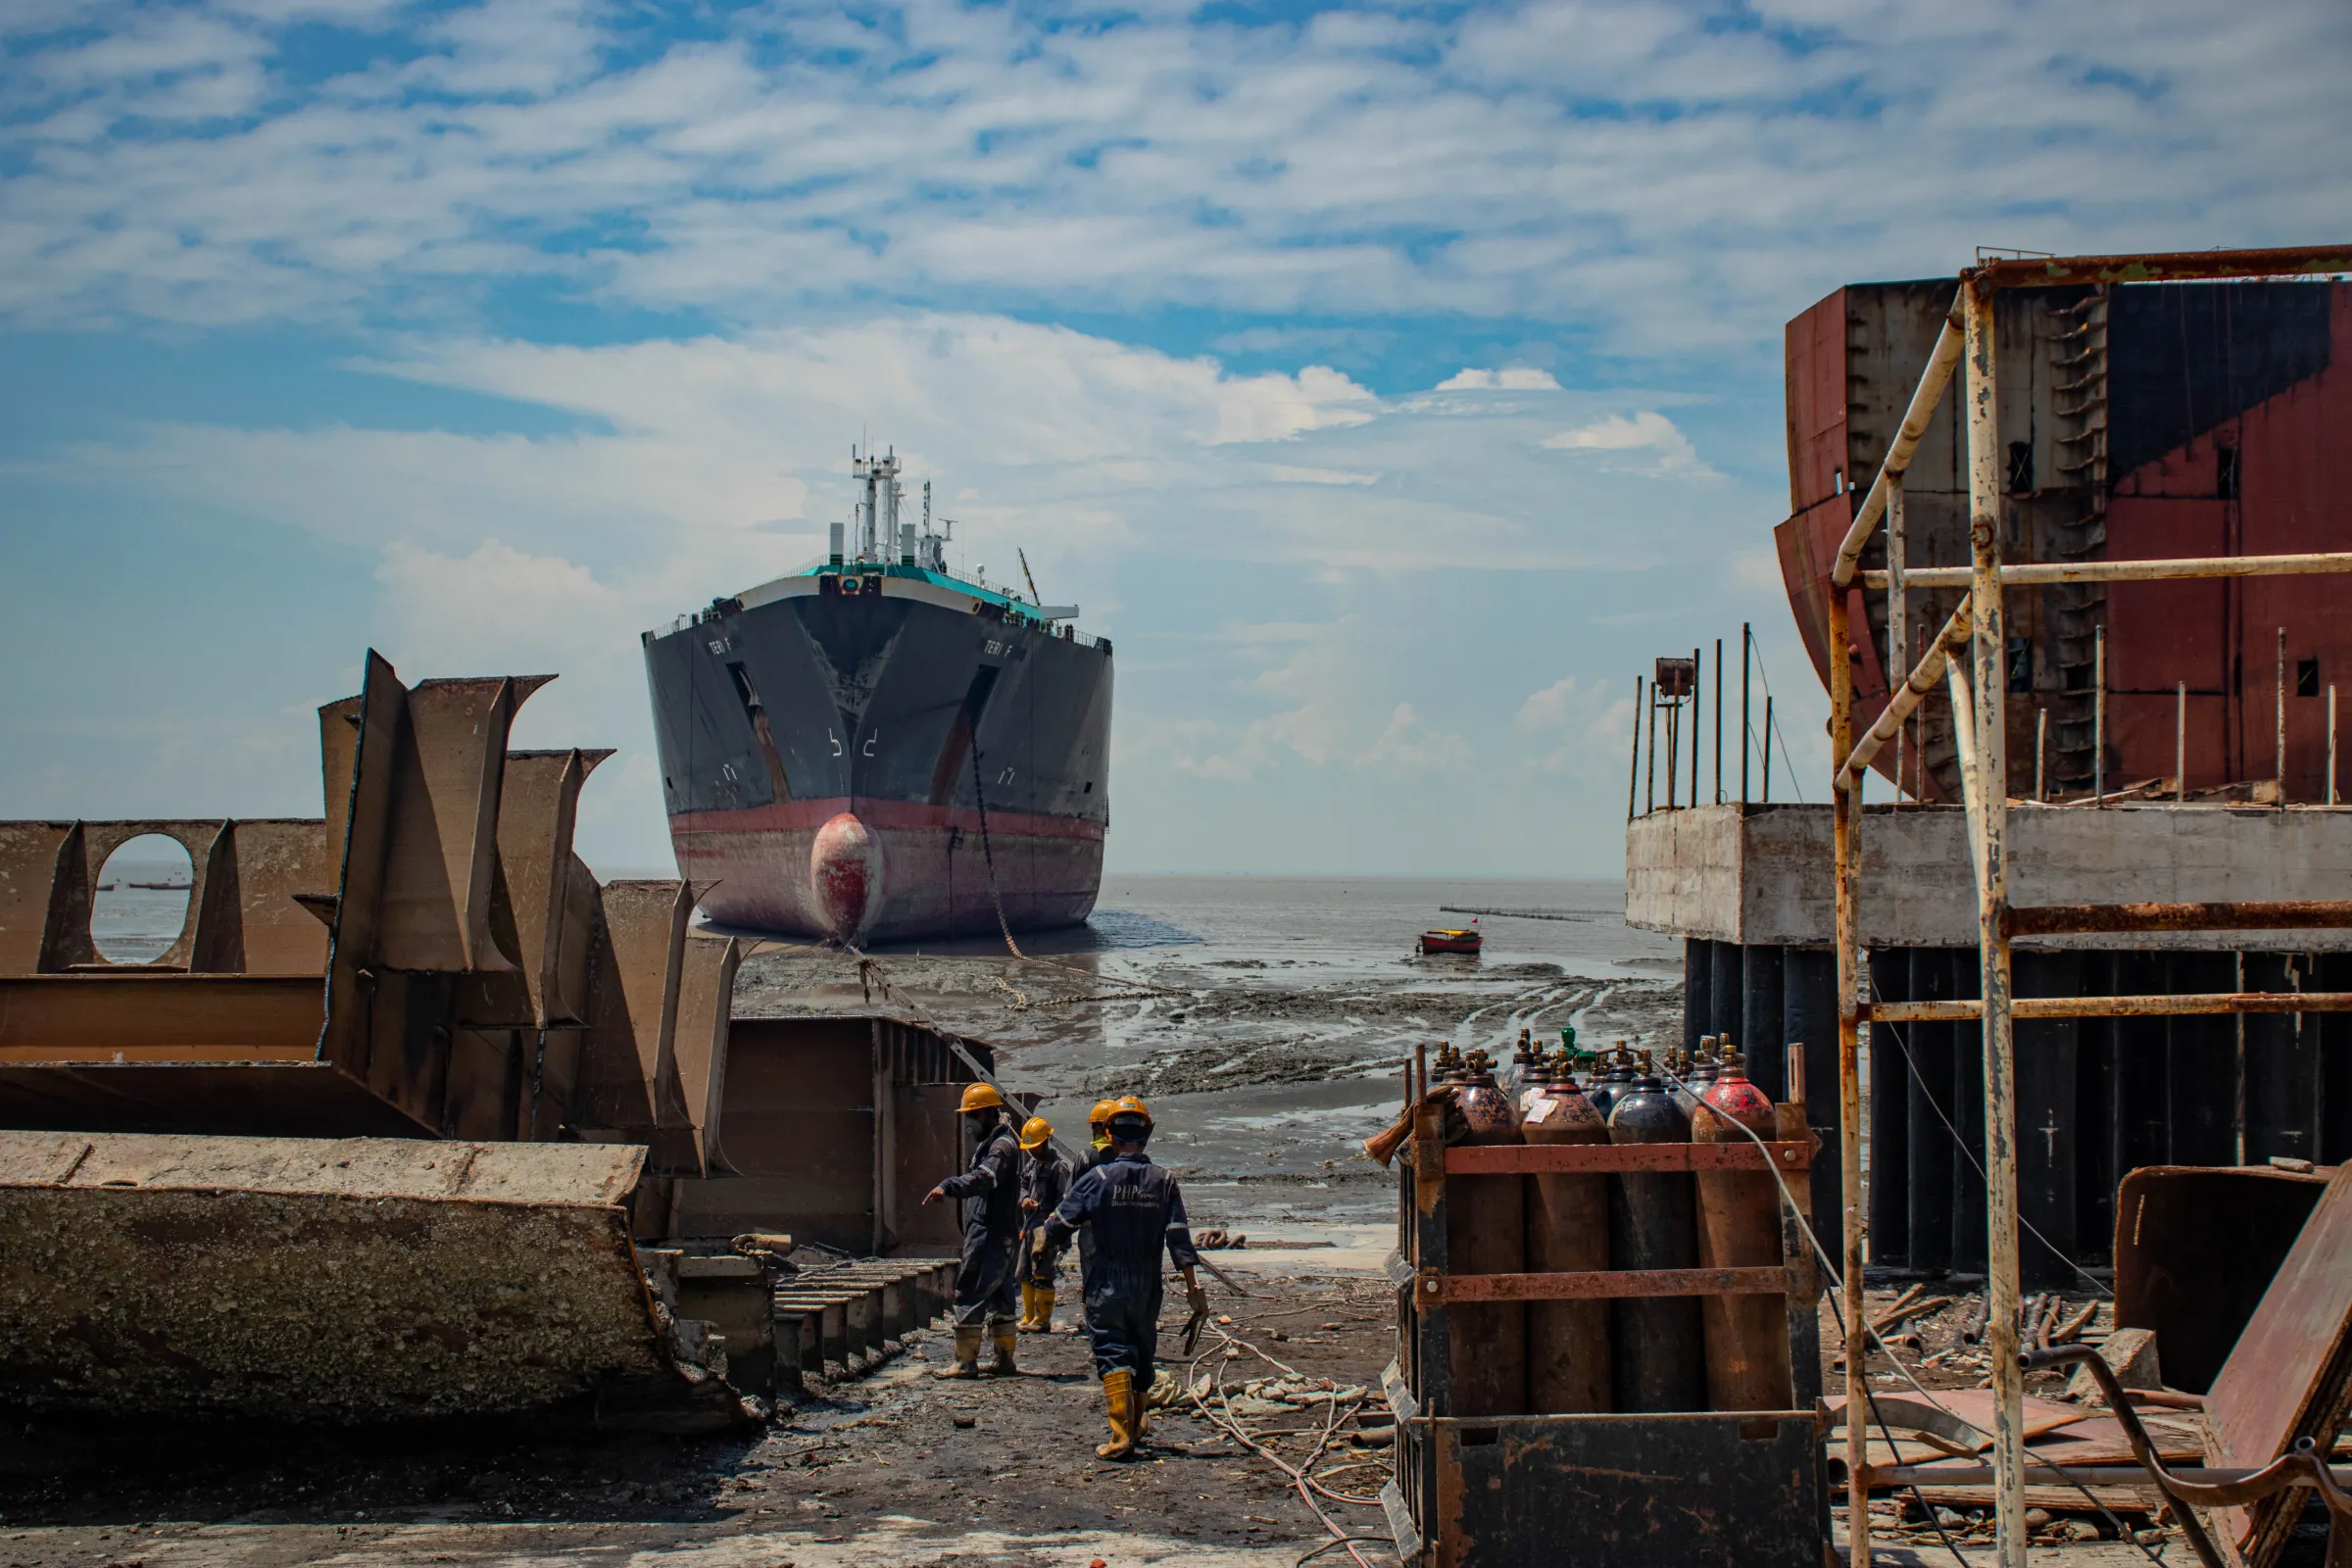 Workers on the impermeable floor at the PHP Shipbreaking Yard in Chattogram, Bangladesh on September 23, 2021